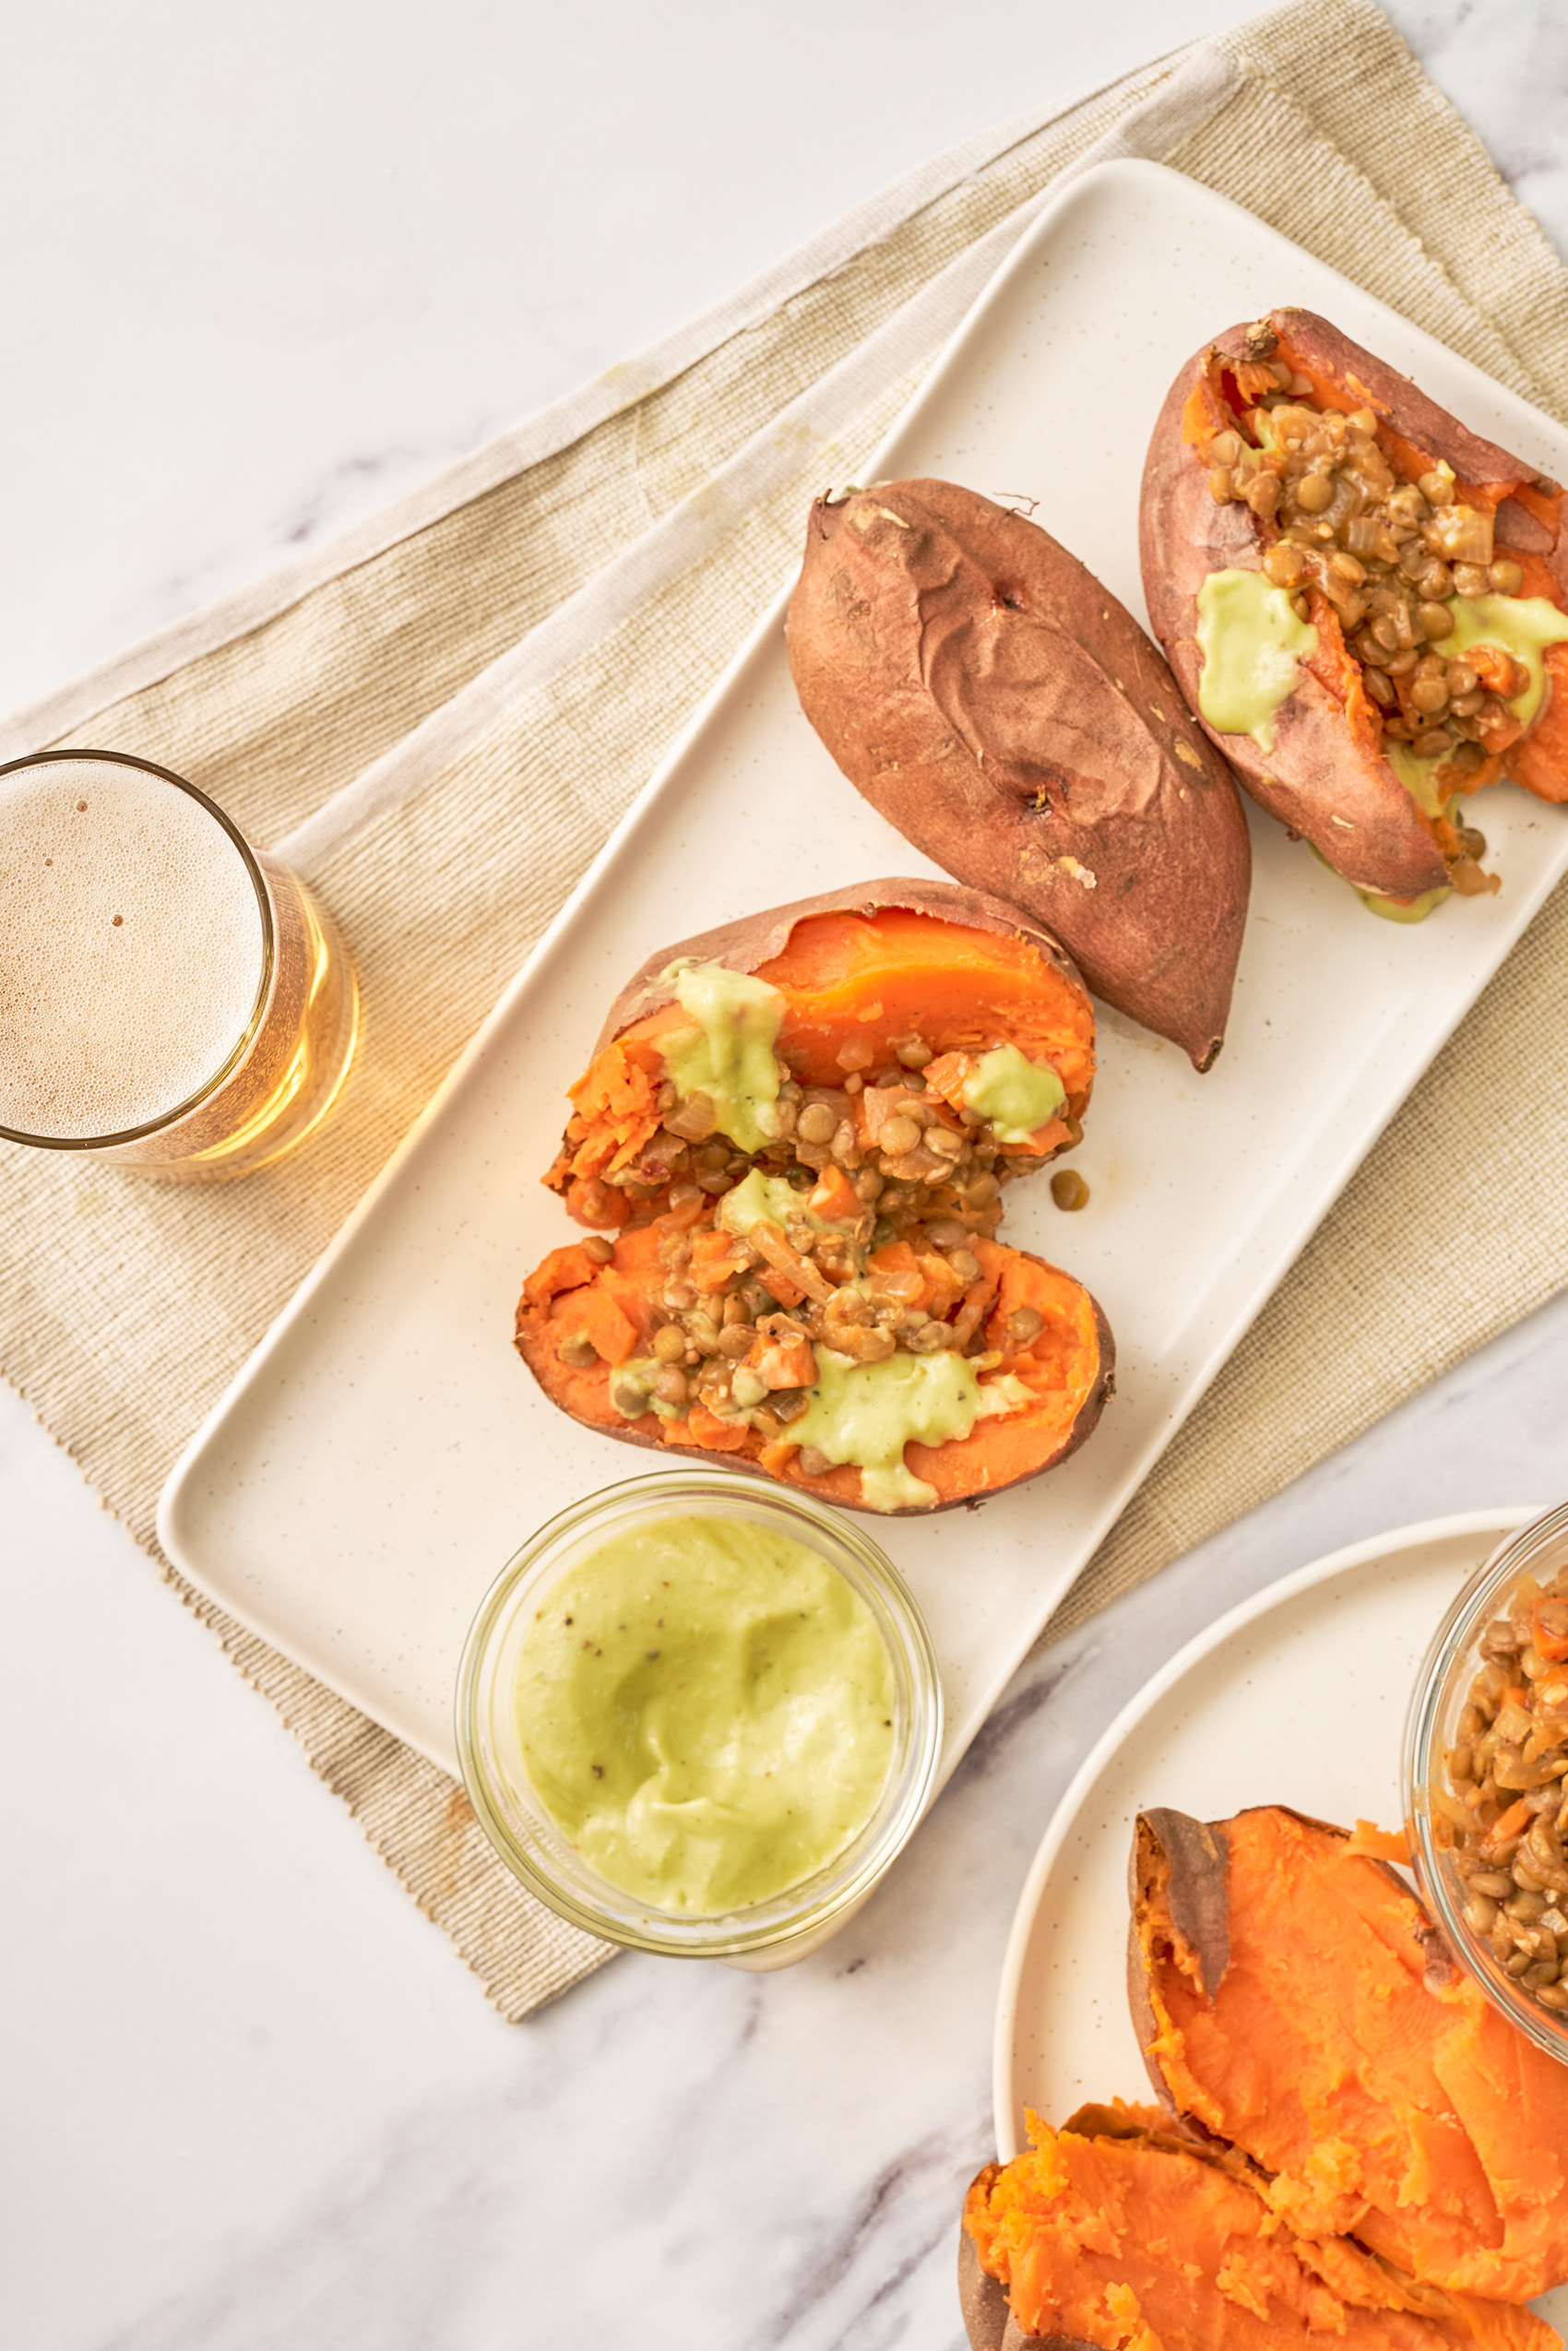 two sweet potatoes that have been sliced down the middle and stuffed with lentils, served with an avocado sauce